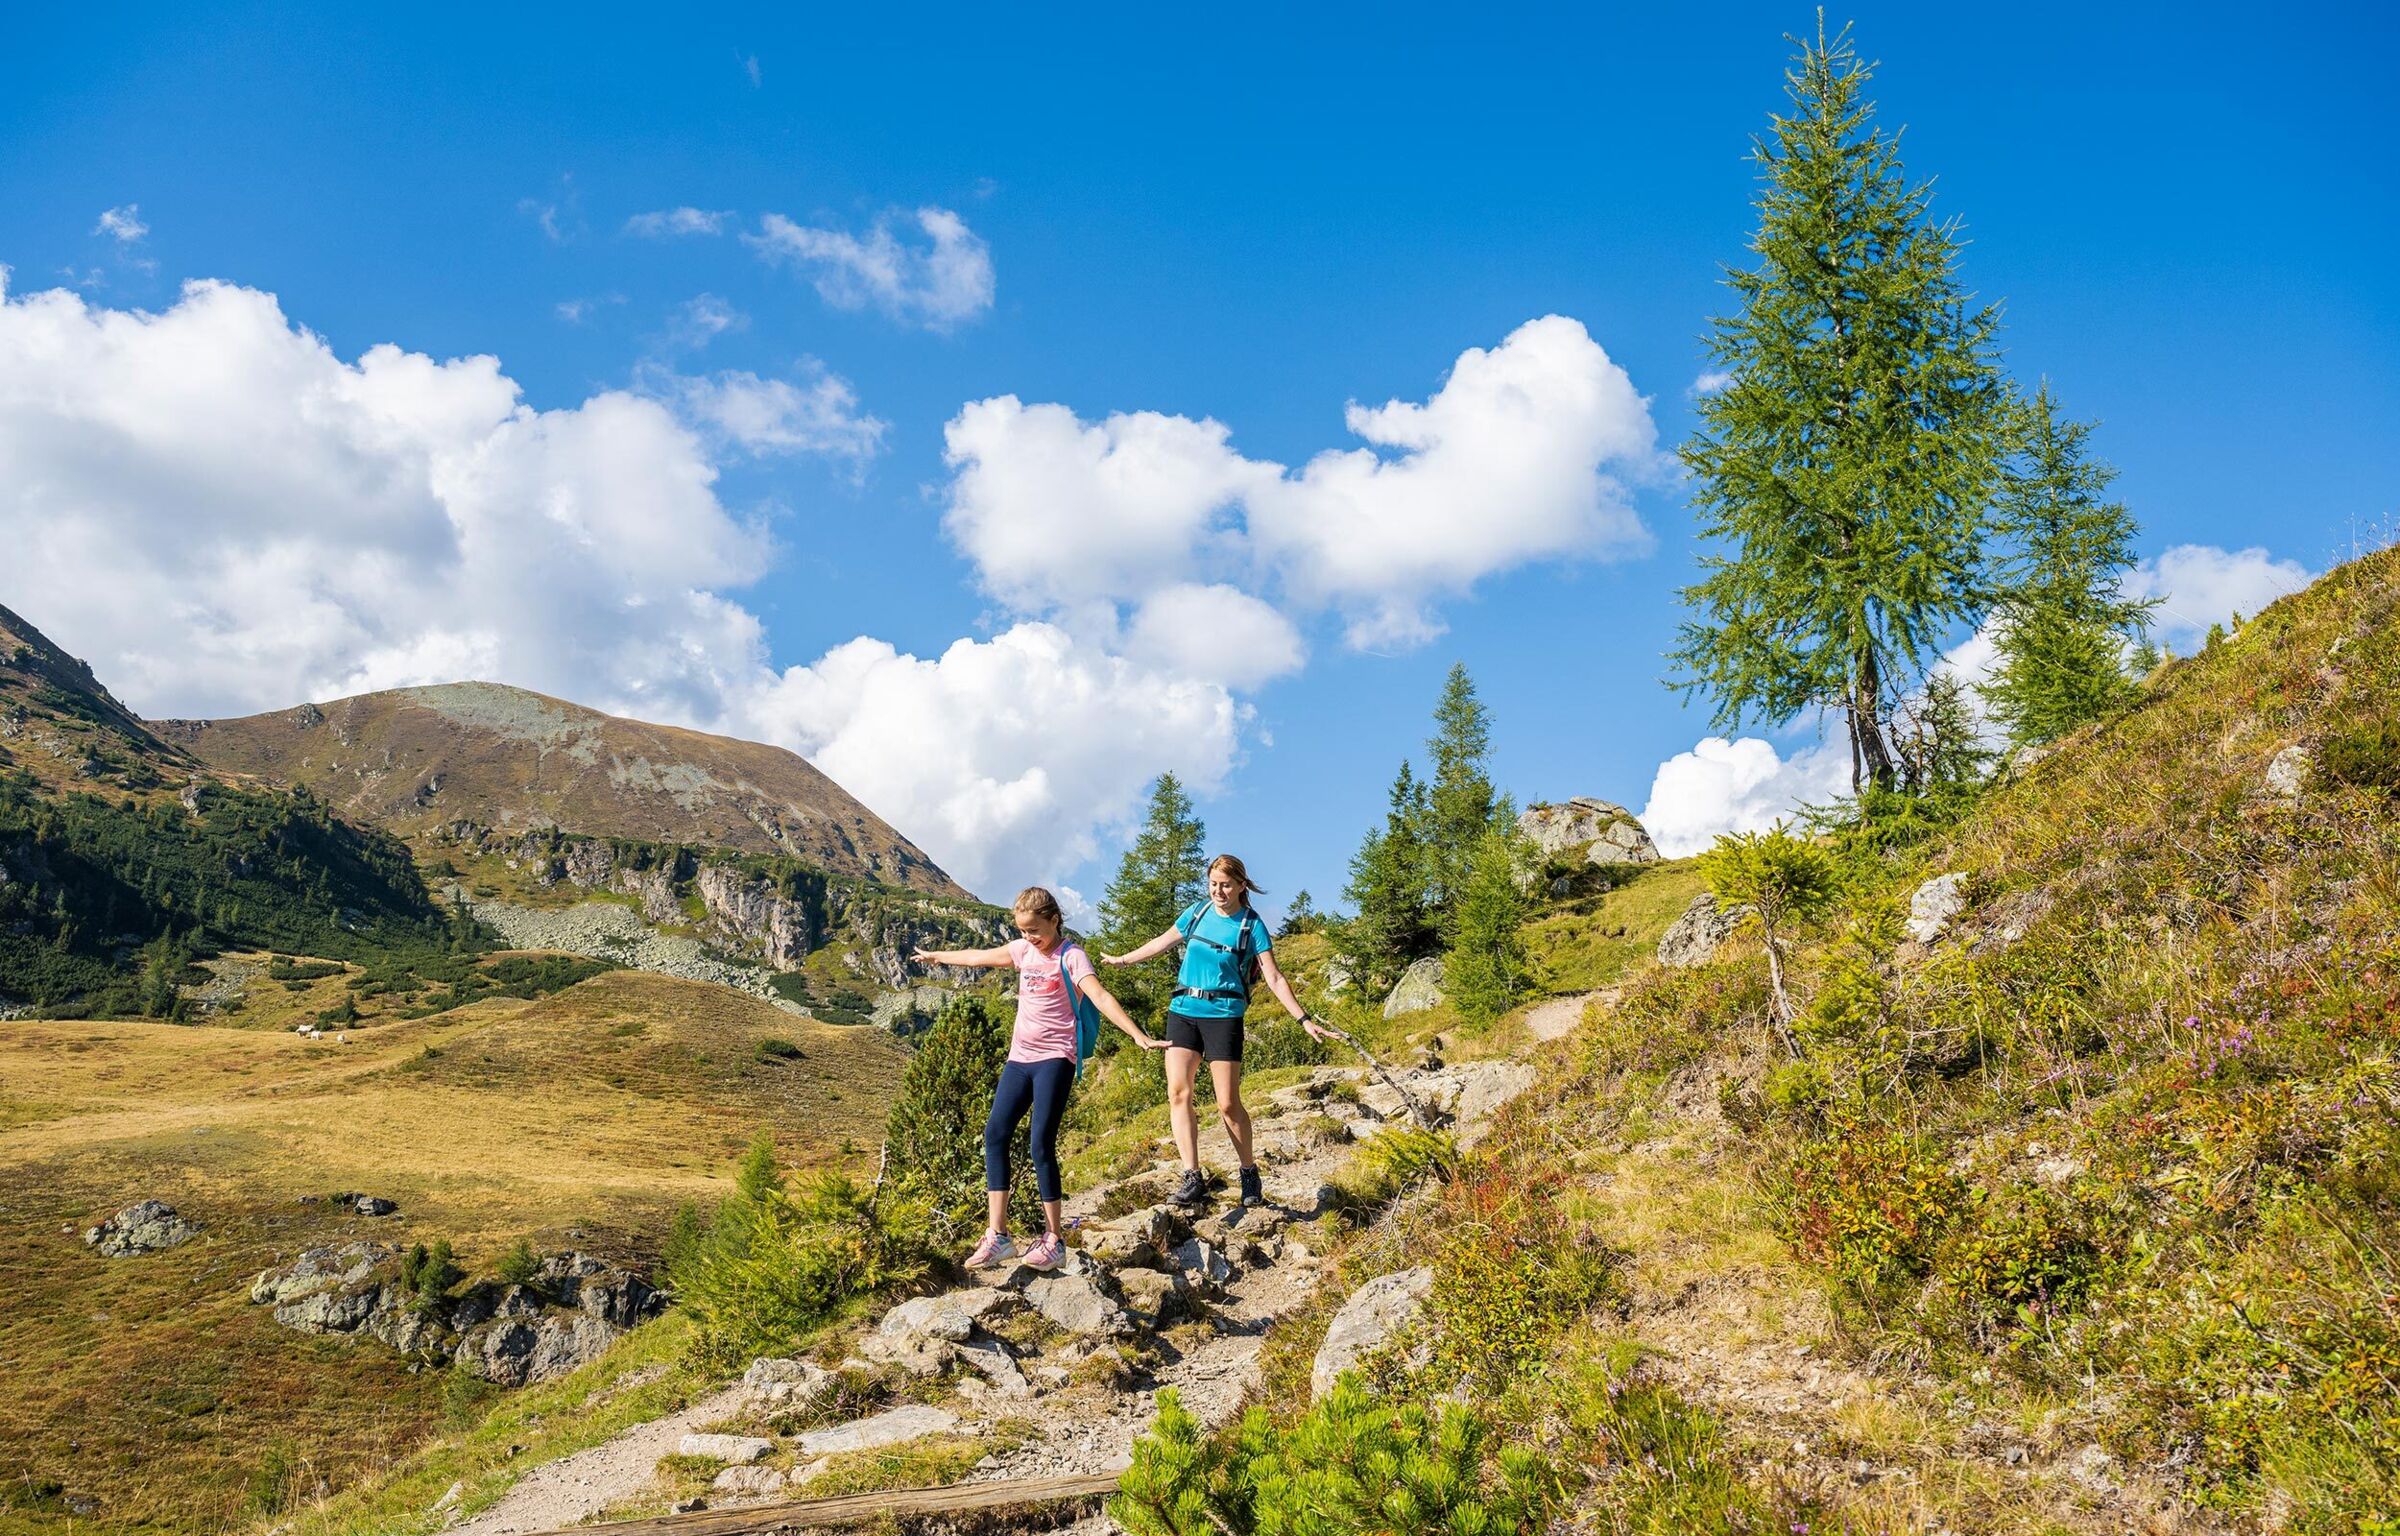 Two women go hiking in the Nockberge mountains in Carinthia